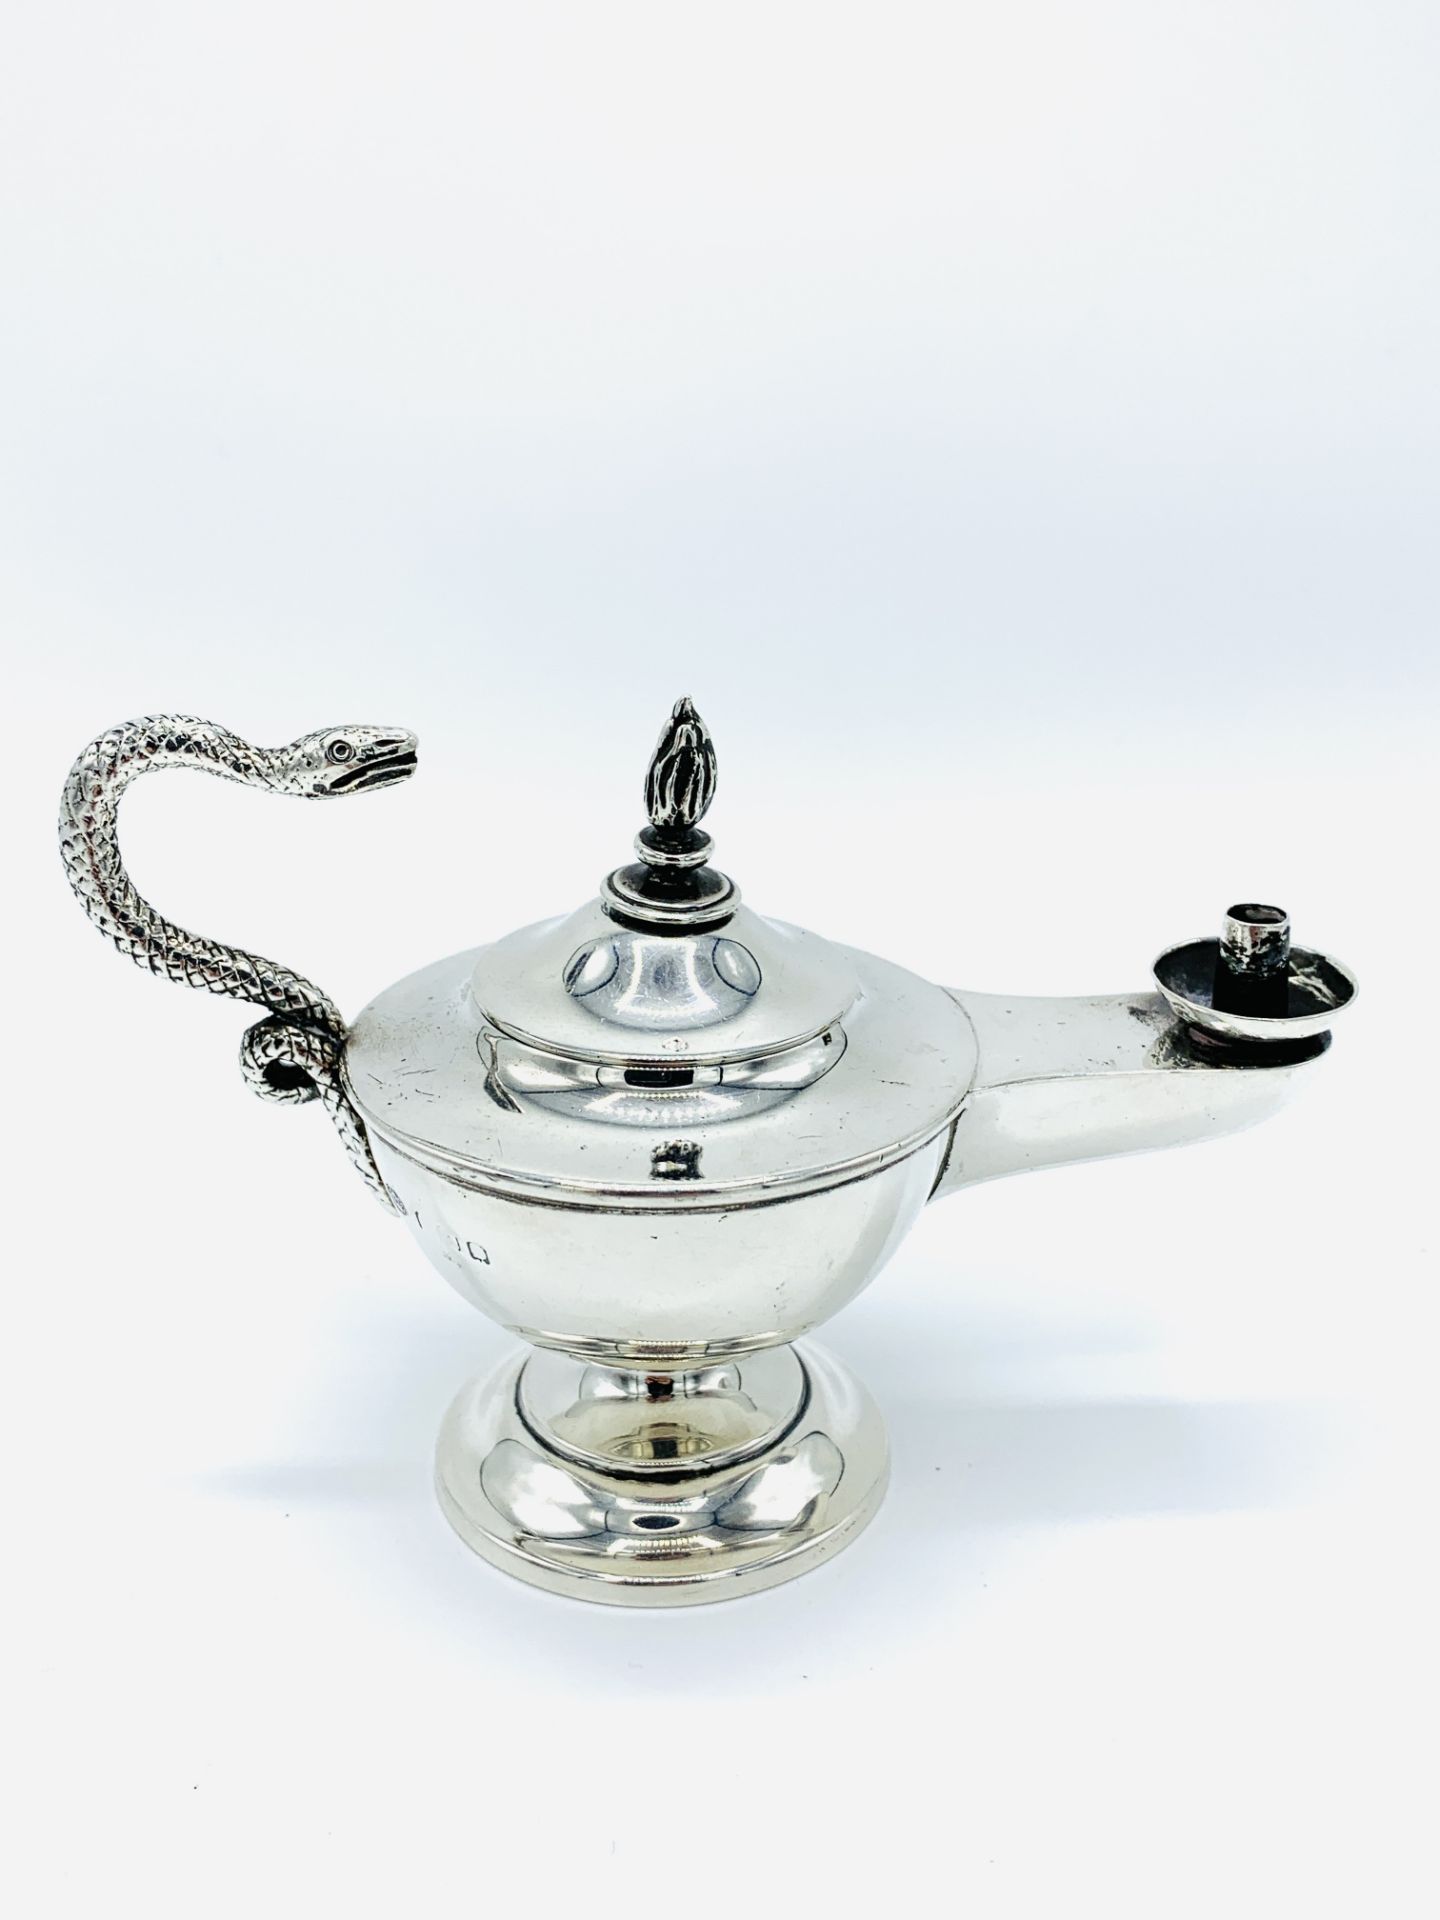 Aladdin's lamp style table/cigar lighter, with serpent handle.